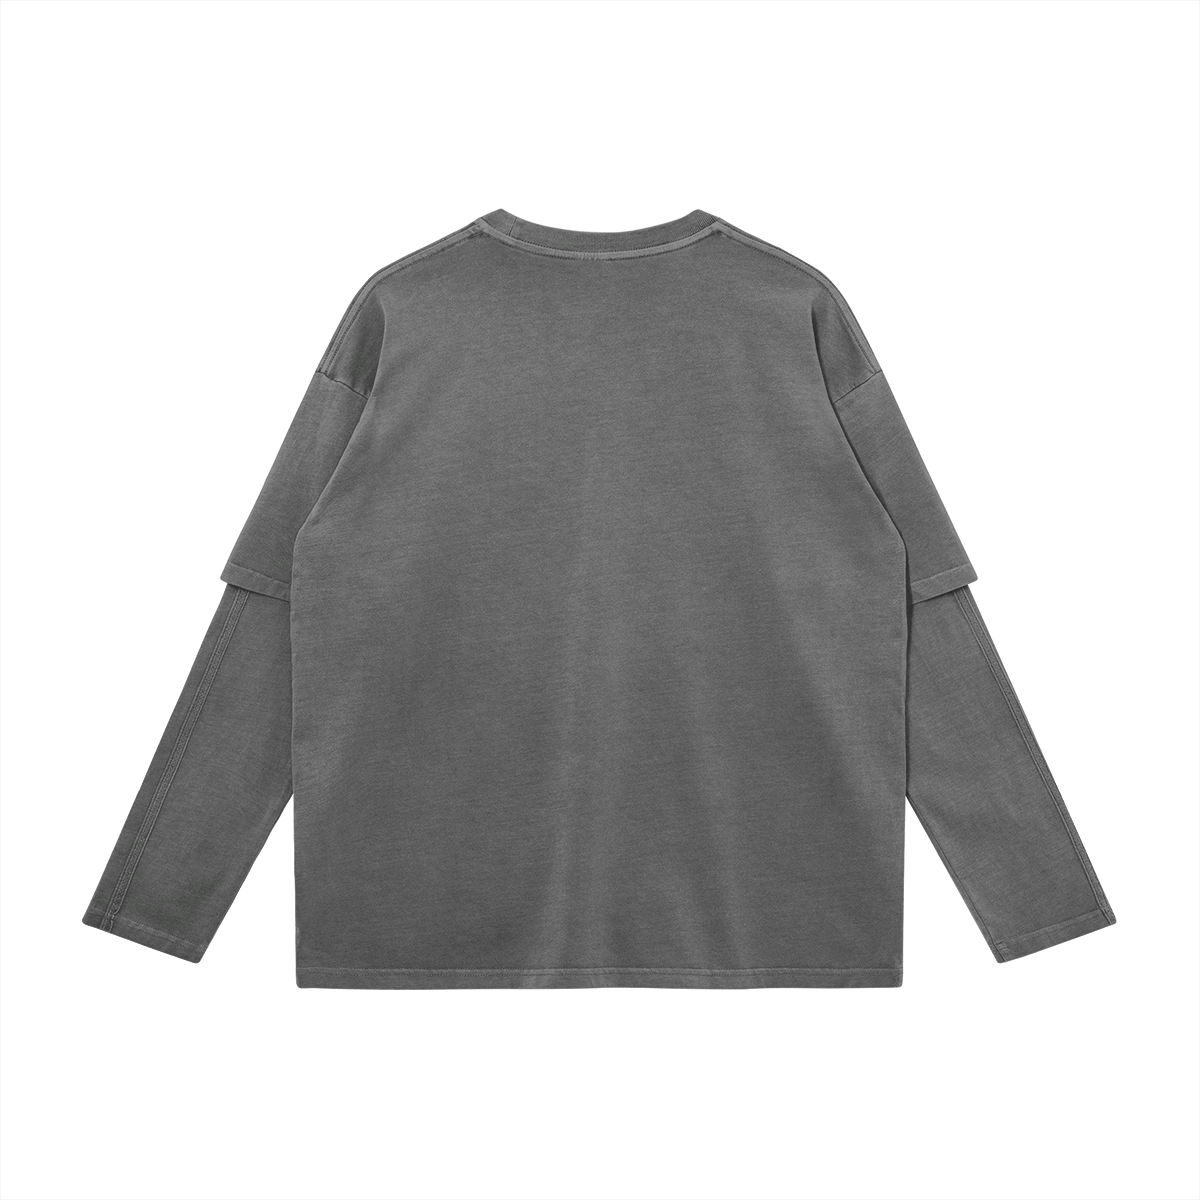 Landon West® Faux-layered Faded Long Sleeve